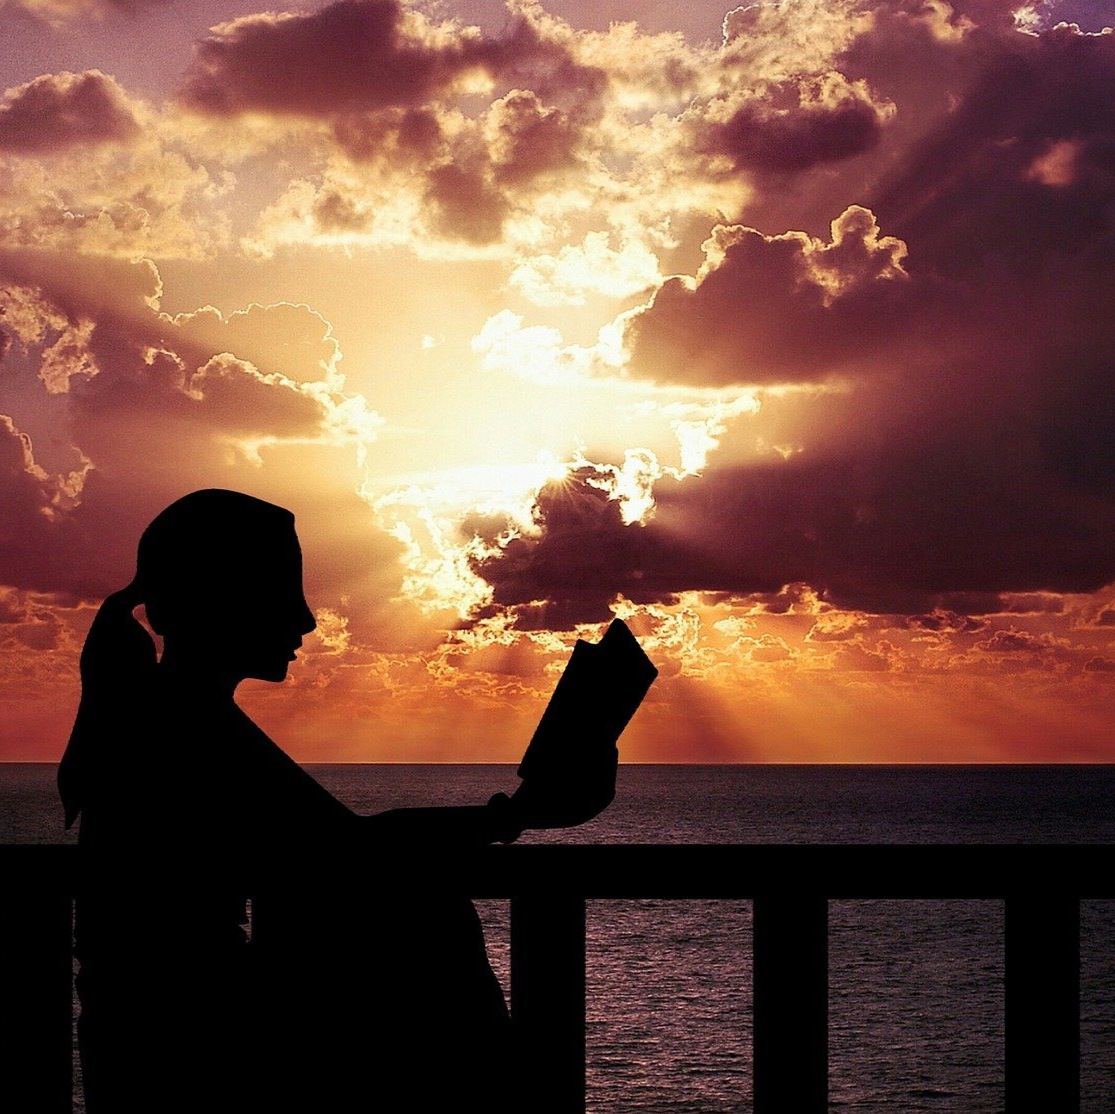 A photo of a person with a ponytail reading a book in silhouette against a sunset with lots of clouds above the ocean